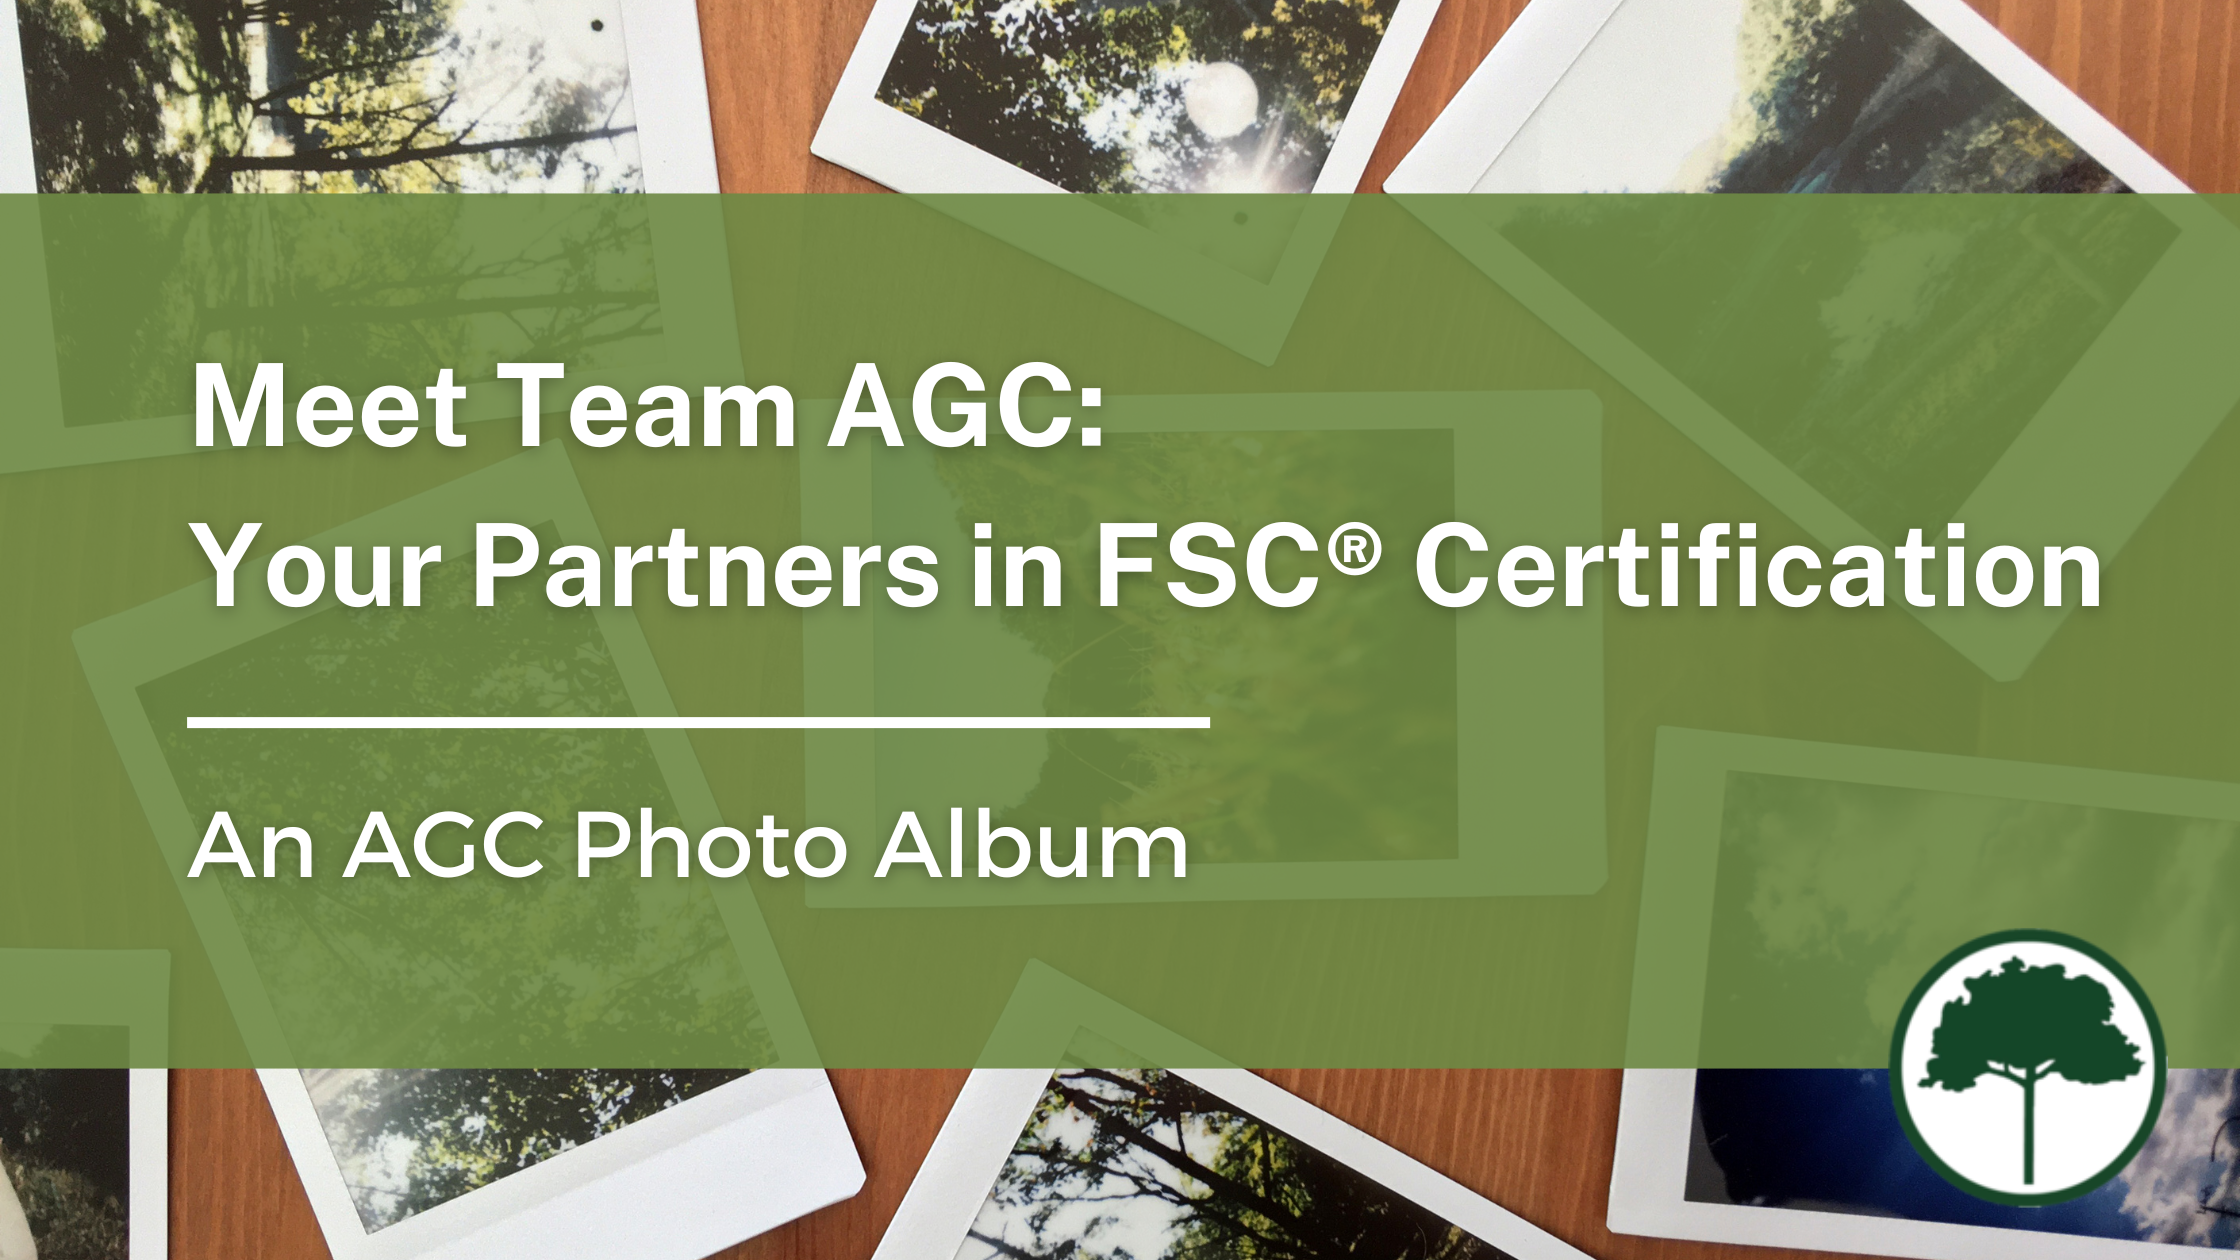 Background image is a wooden table covered in polaroid photos. The text reads: Meet Team AGC - Your partners in FSC certification